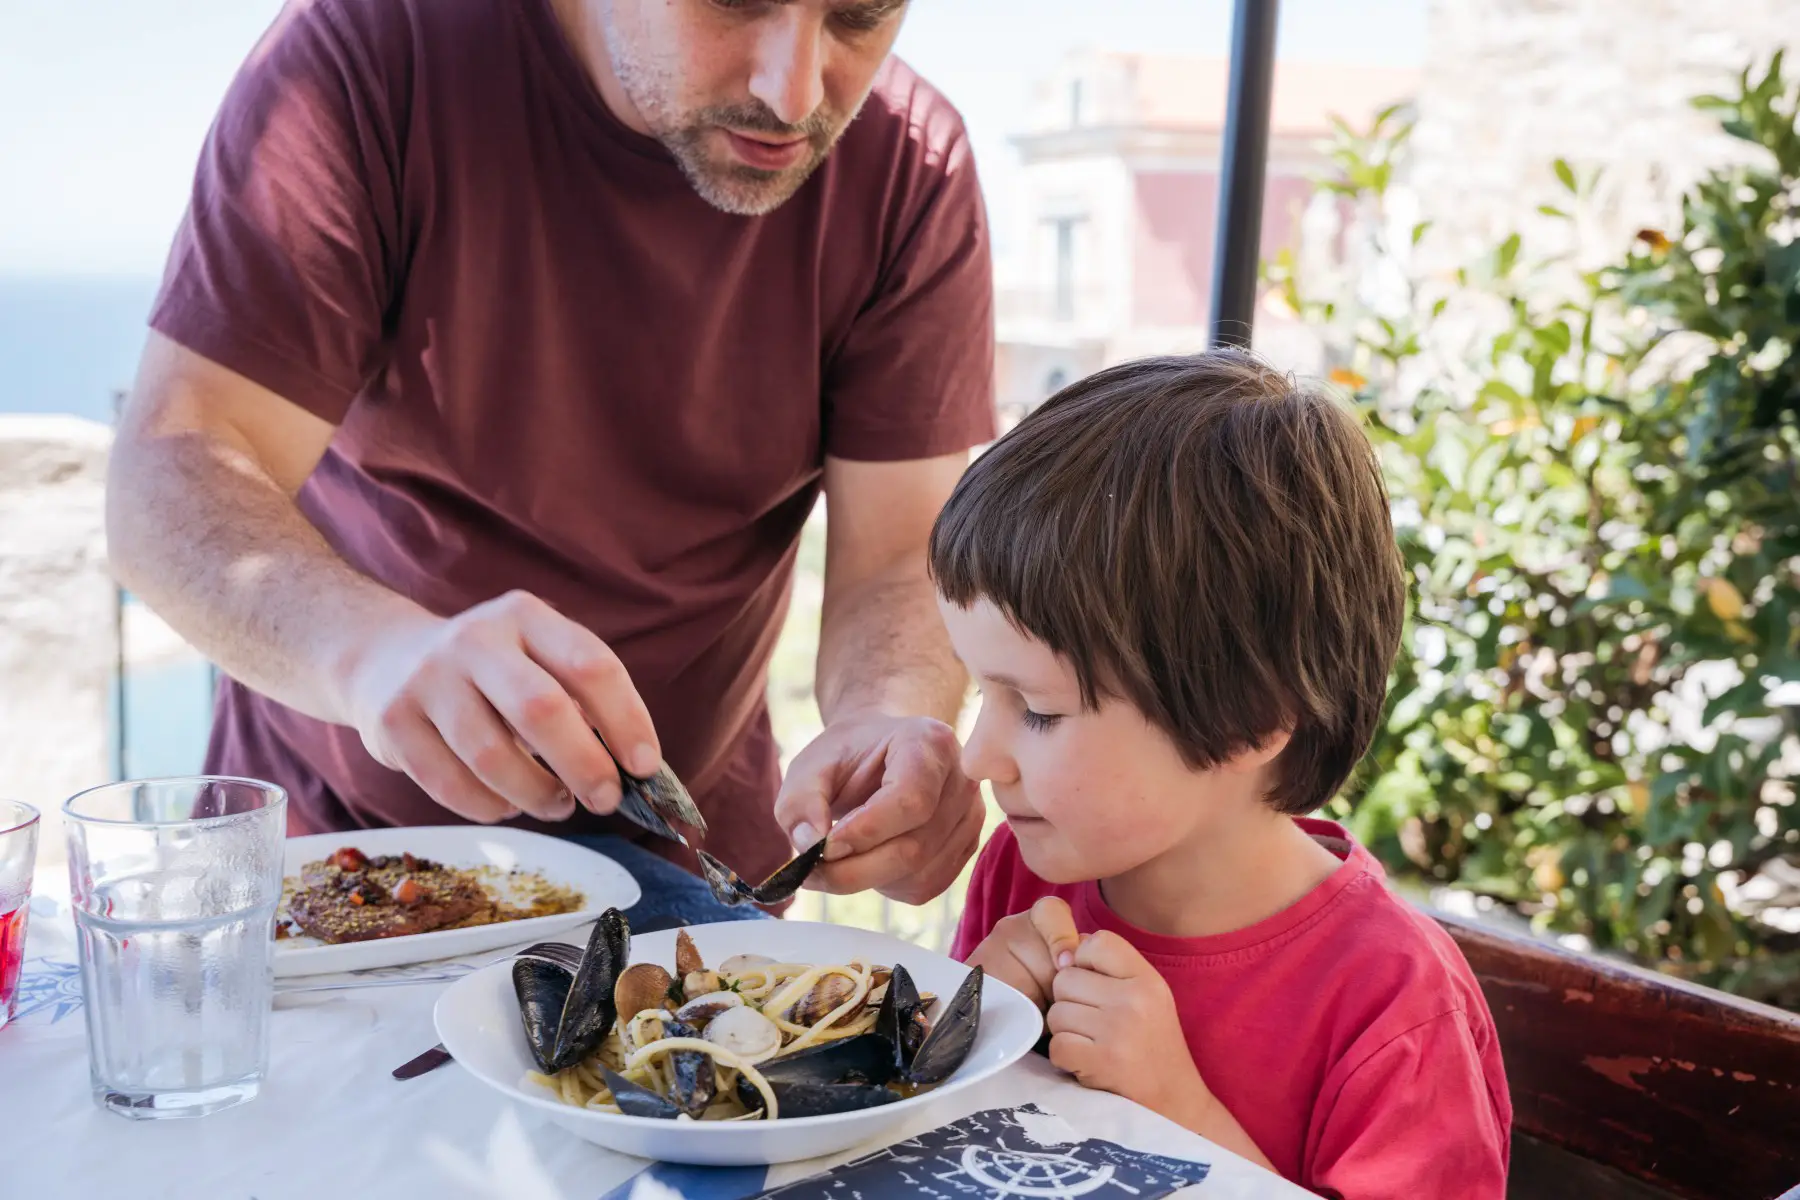 A father showing his young son how to eat mussels on the terrace of a restaurant in Agropoli, Italy